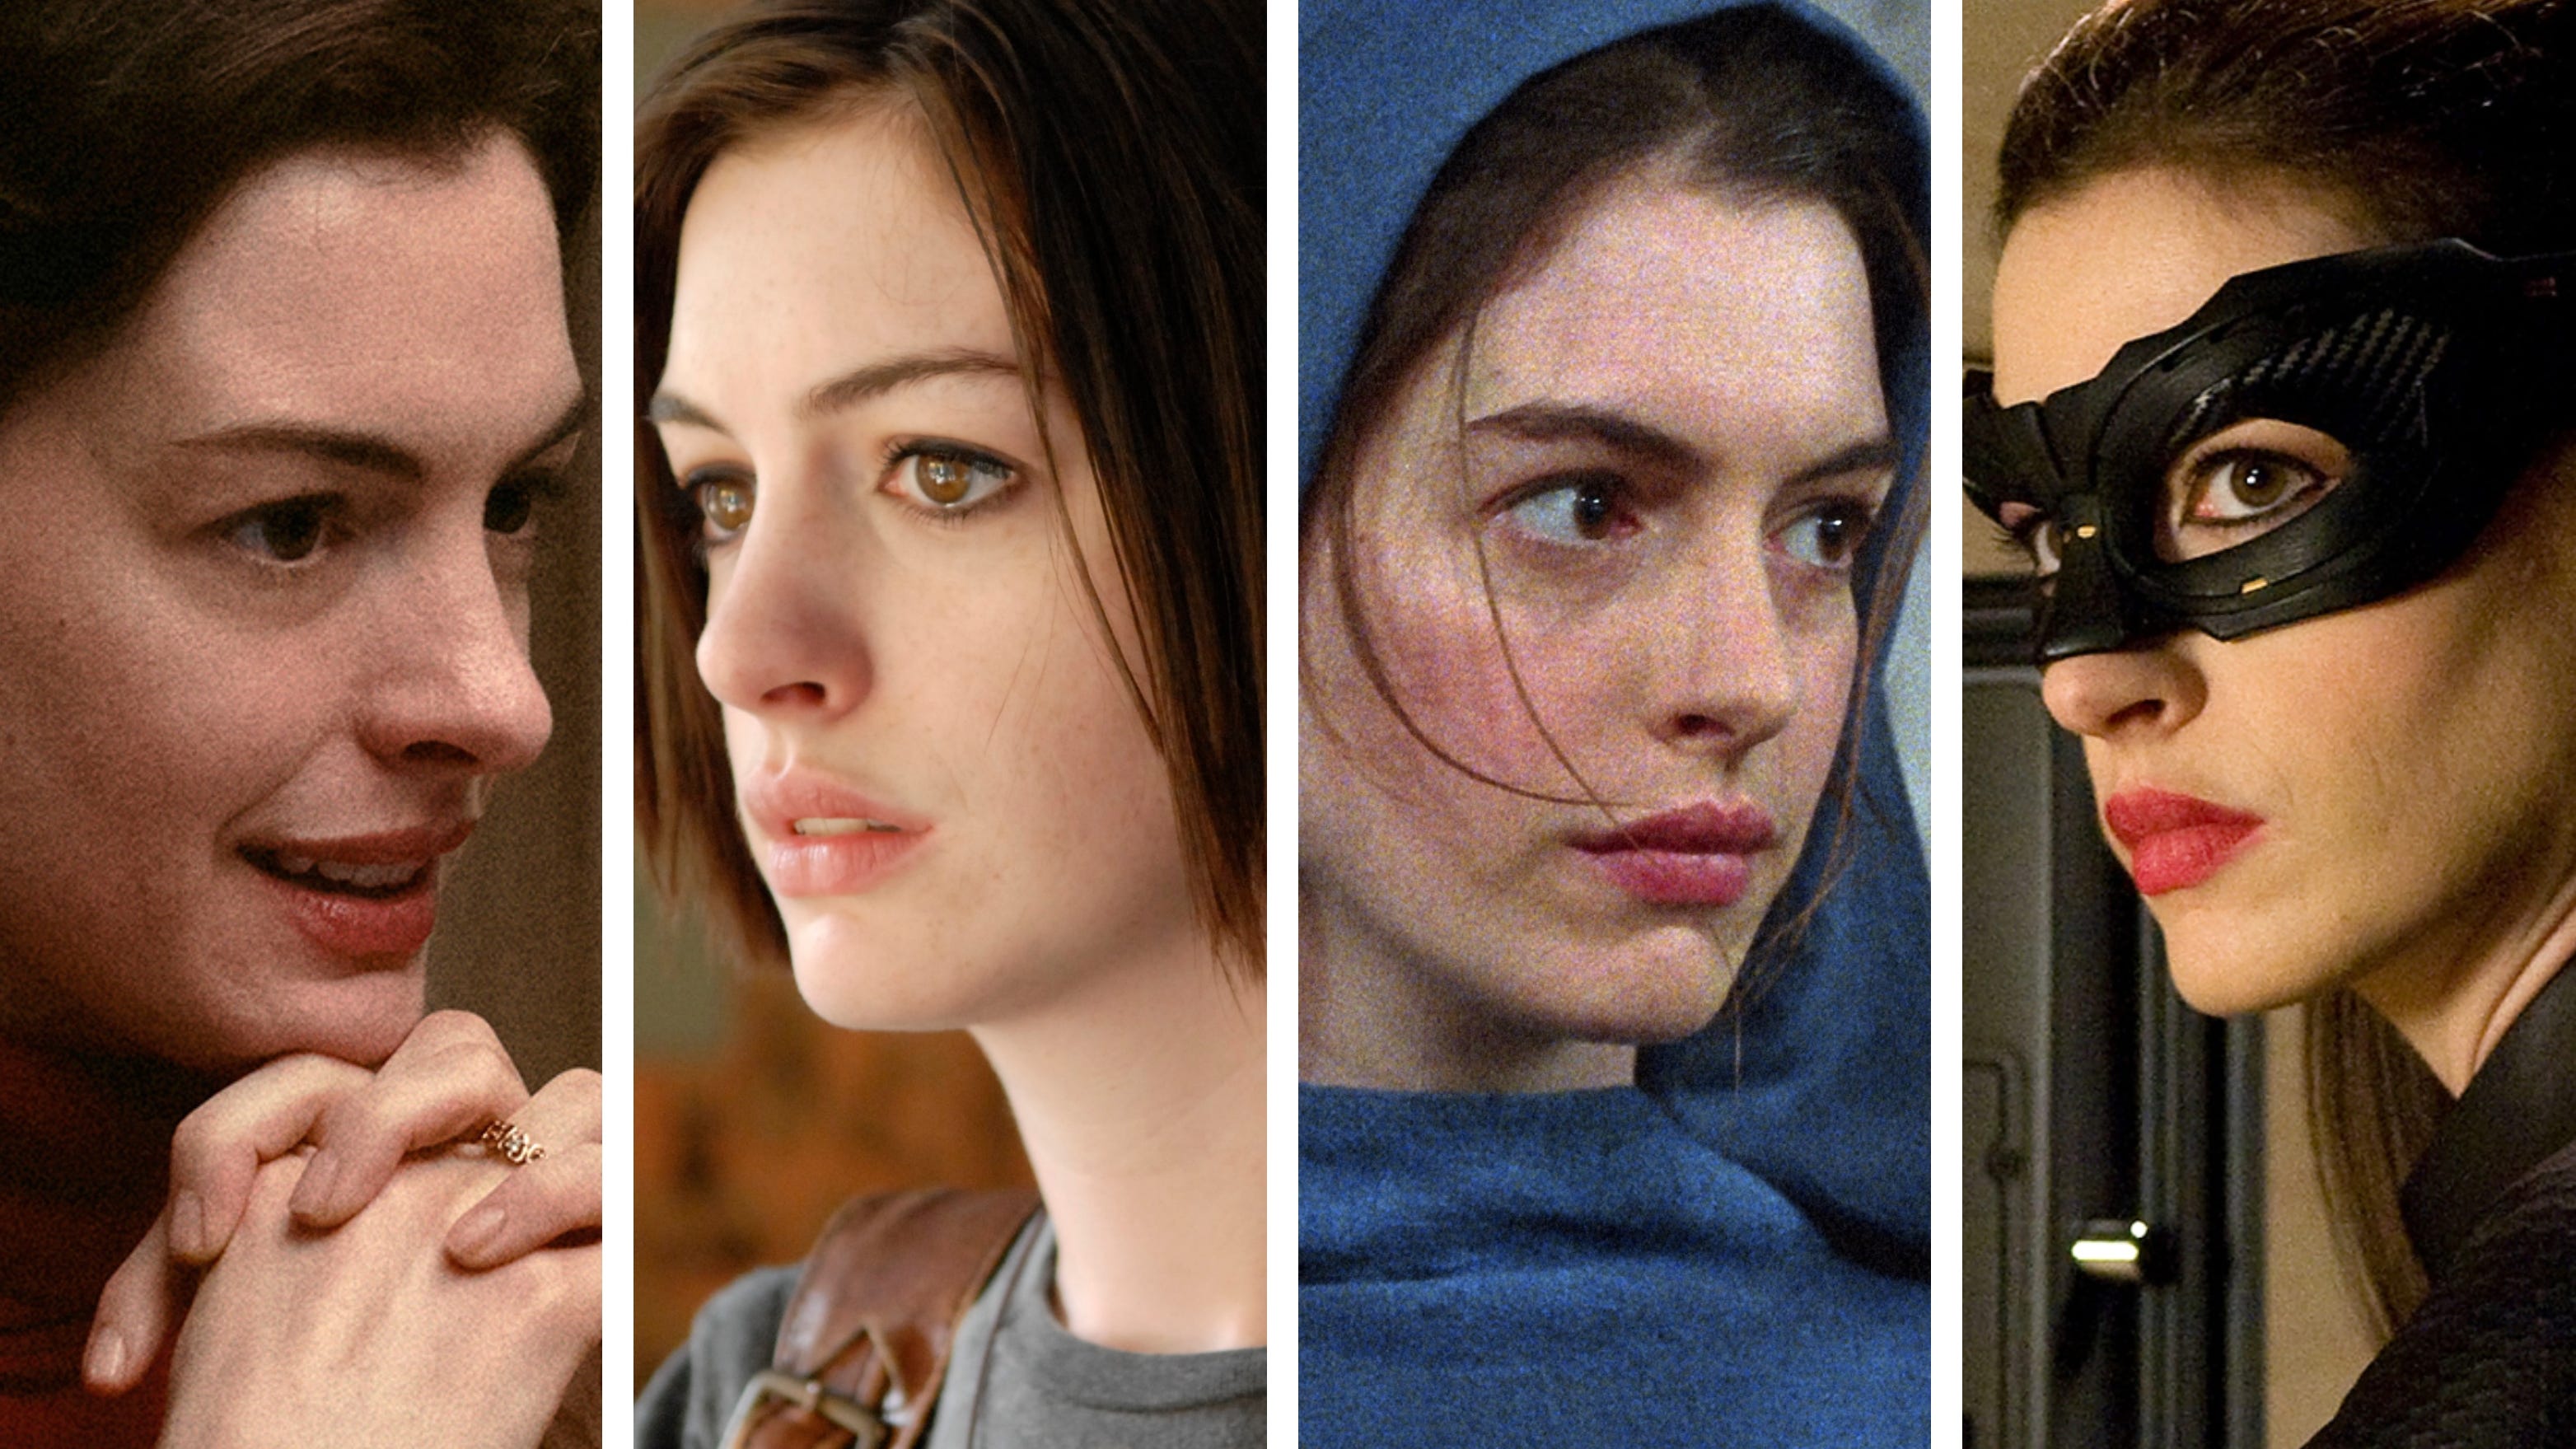 Armageddon Time': Anne Hathaway's 10 best movies, ranked